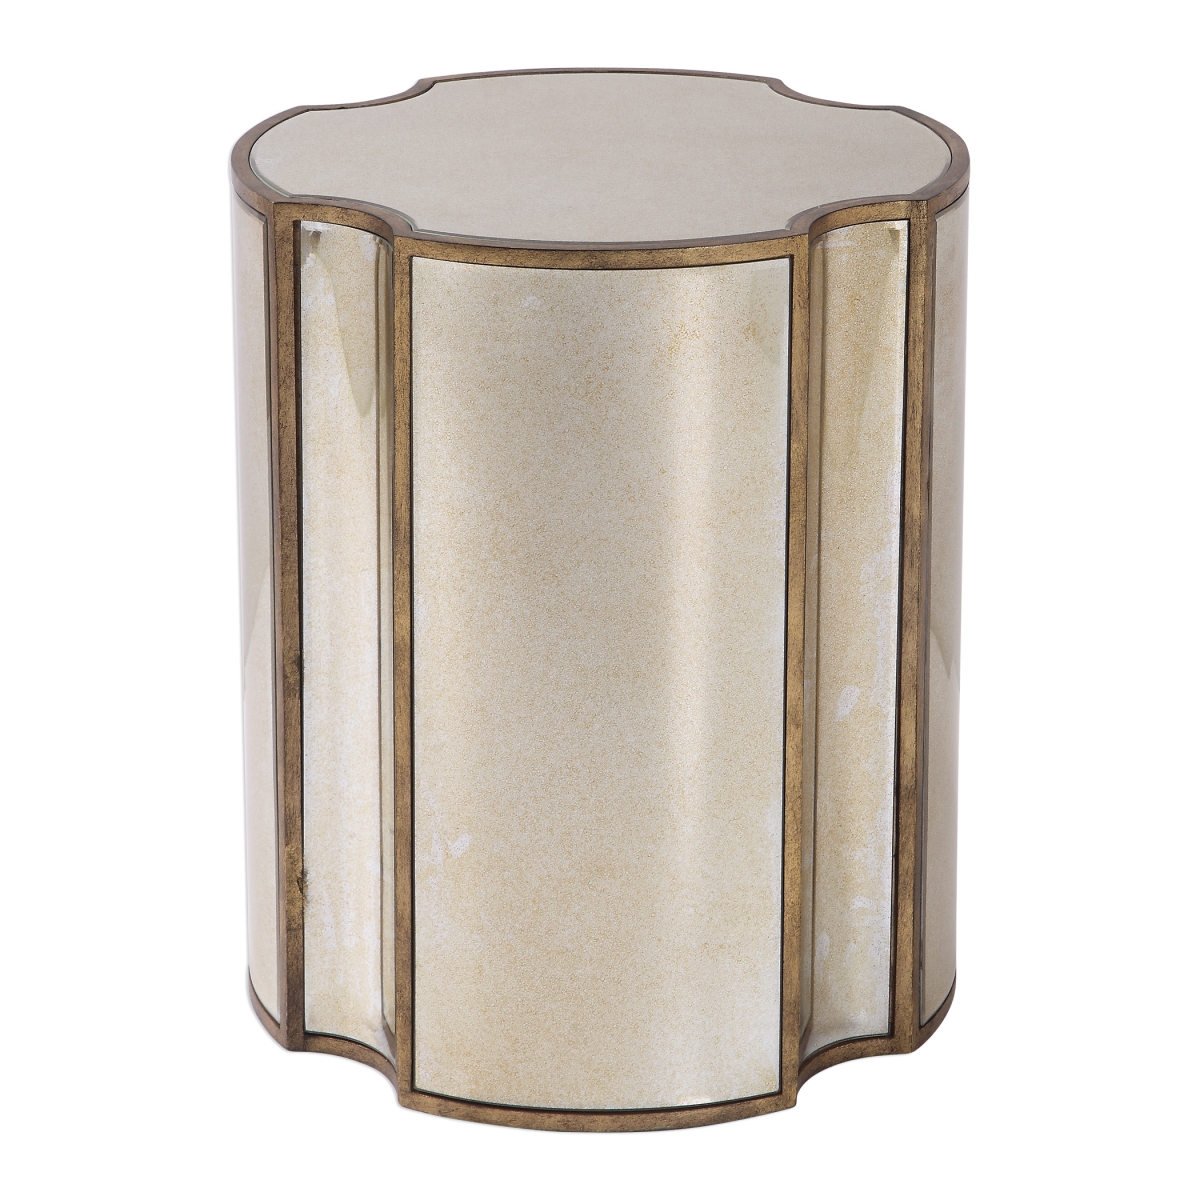 Picture of 212 Main 24888 Harlow Mirrored Accent Table